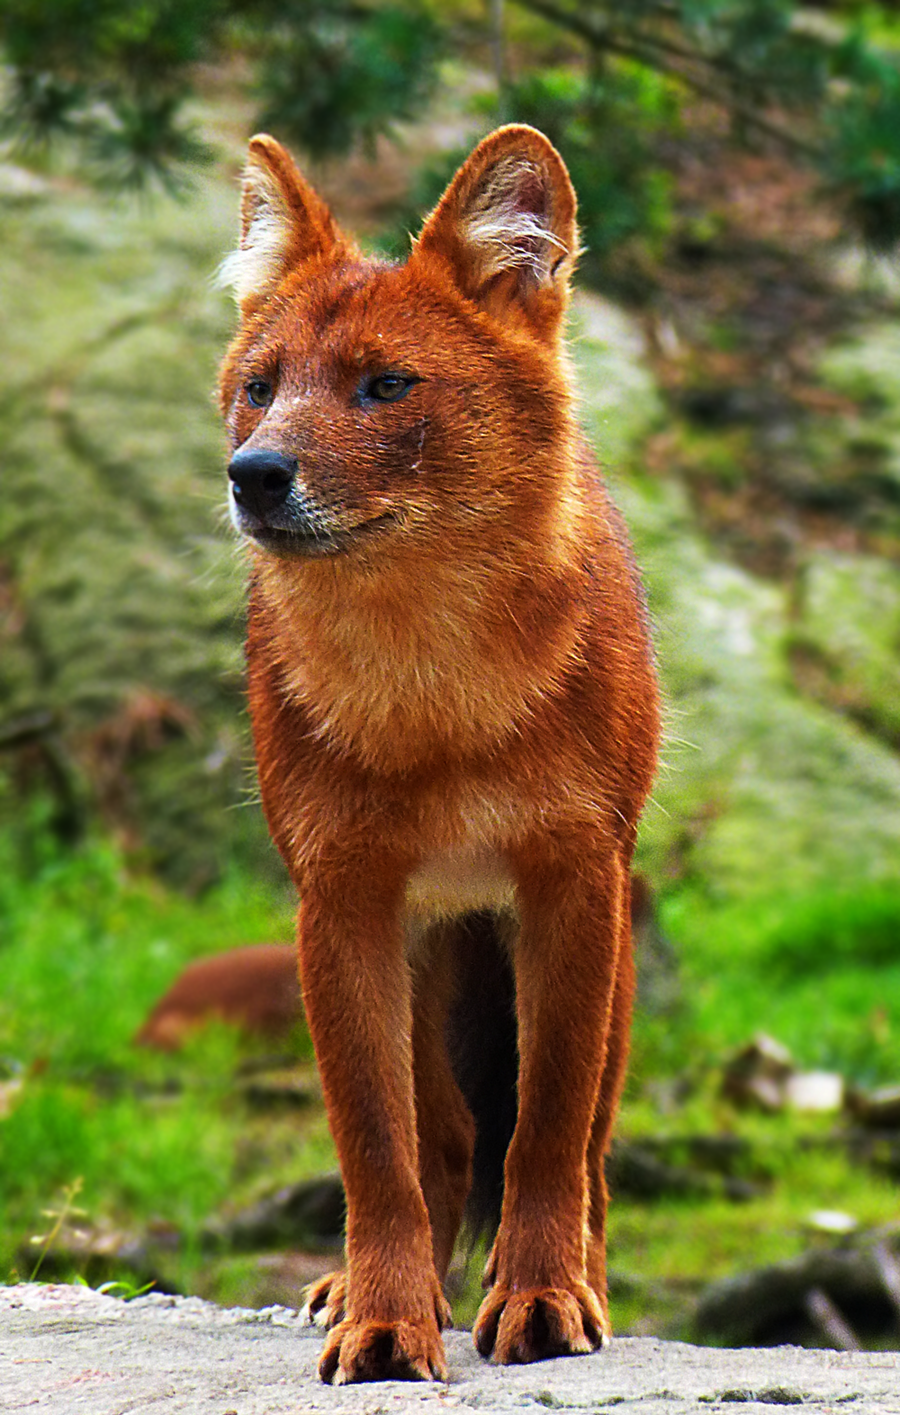 dhole10_by_themysticwolf-d6by2cm.png